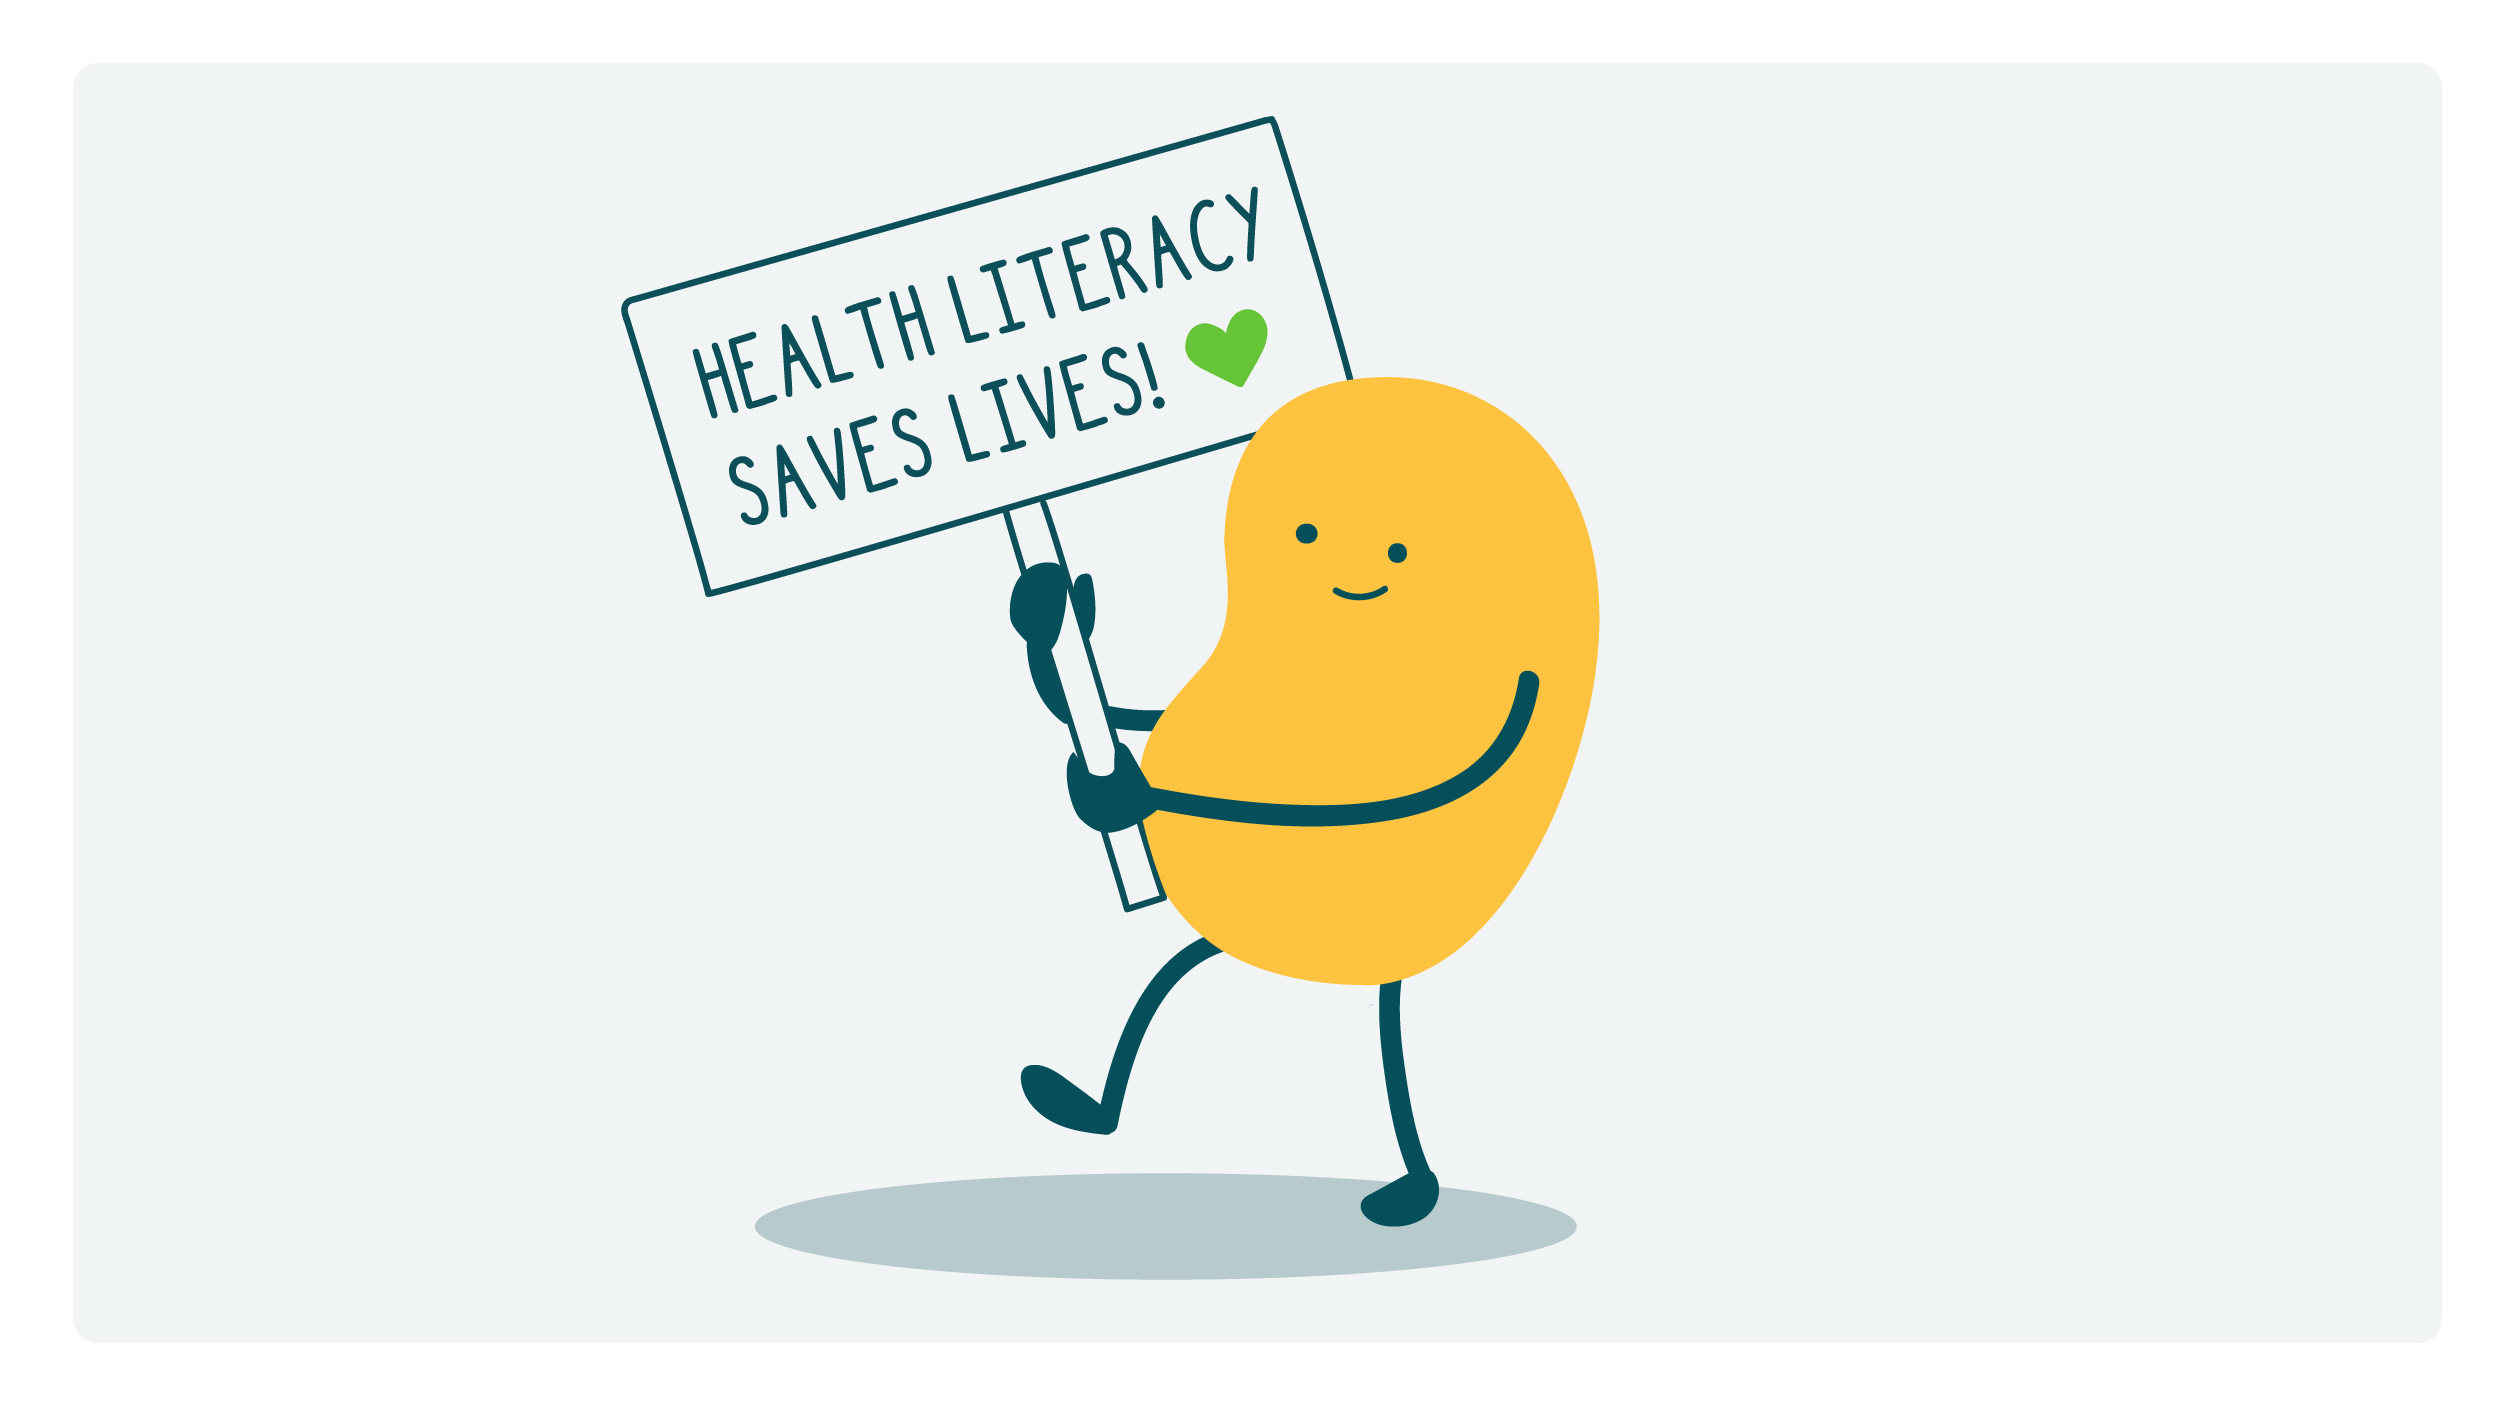 Kidney doodle holding a sign that says "Health Literacy Saves Lives!"